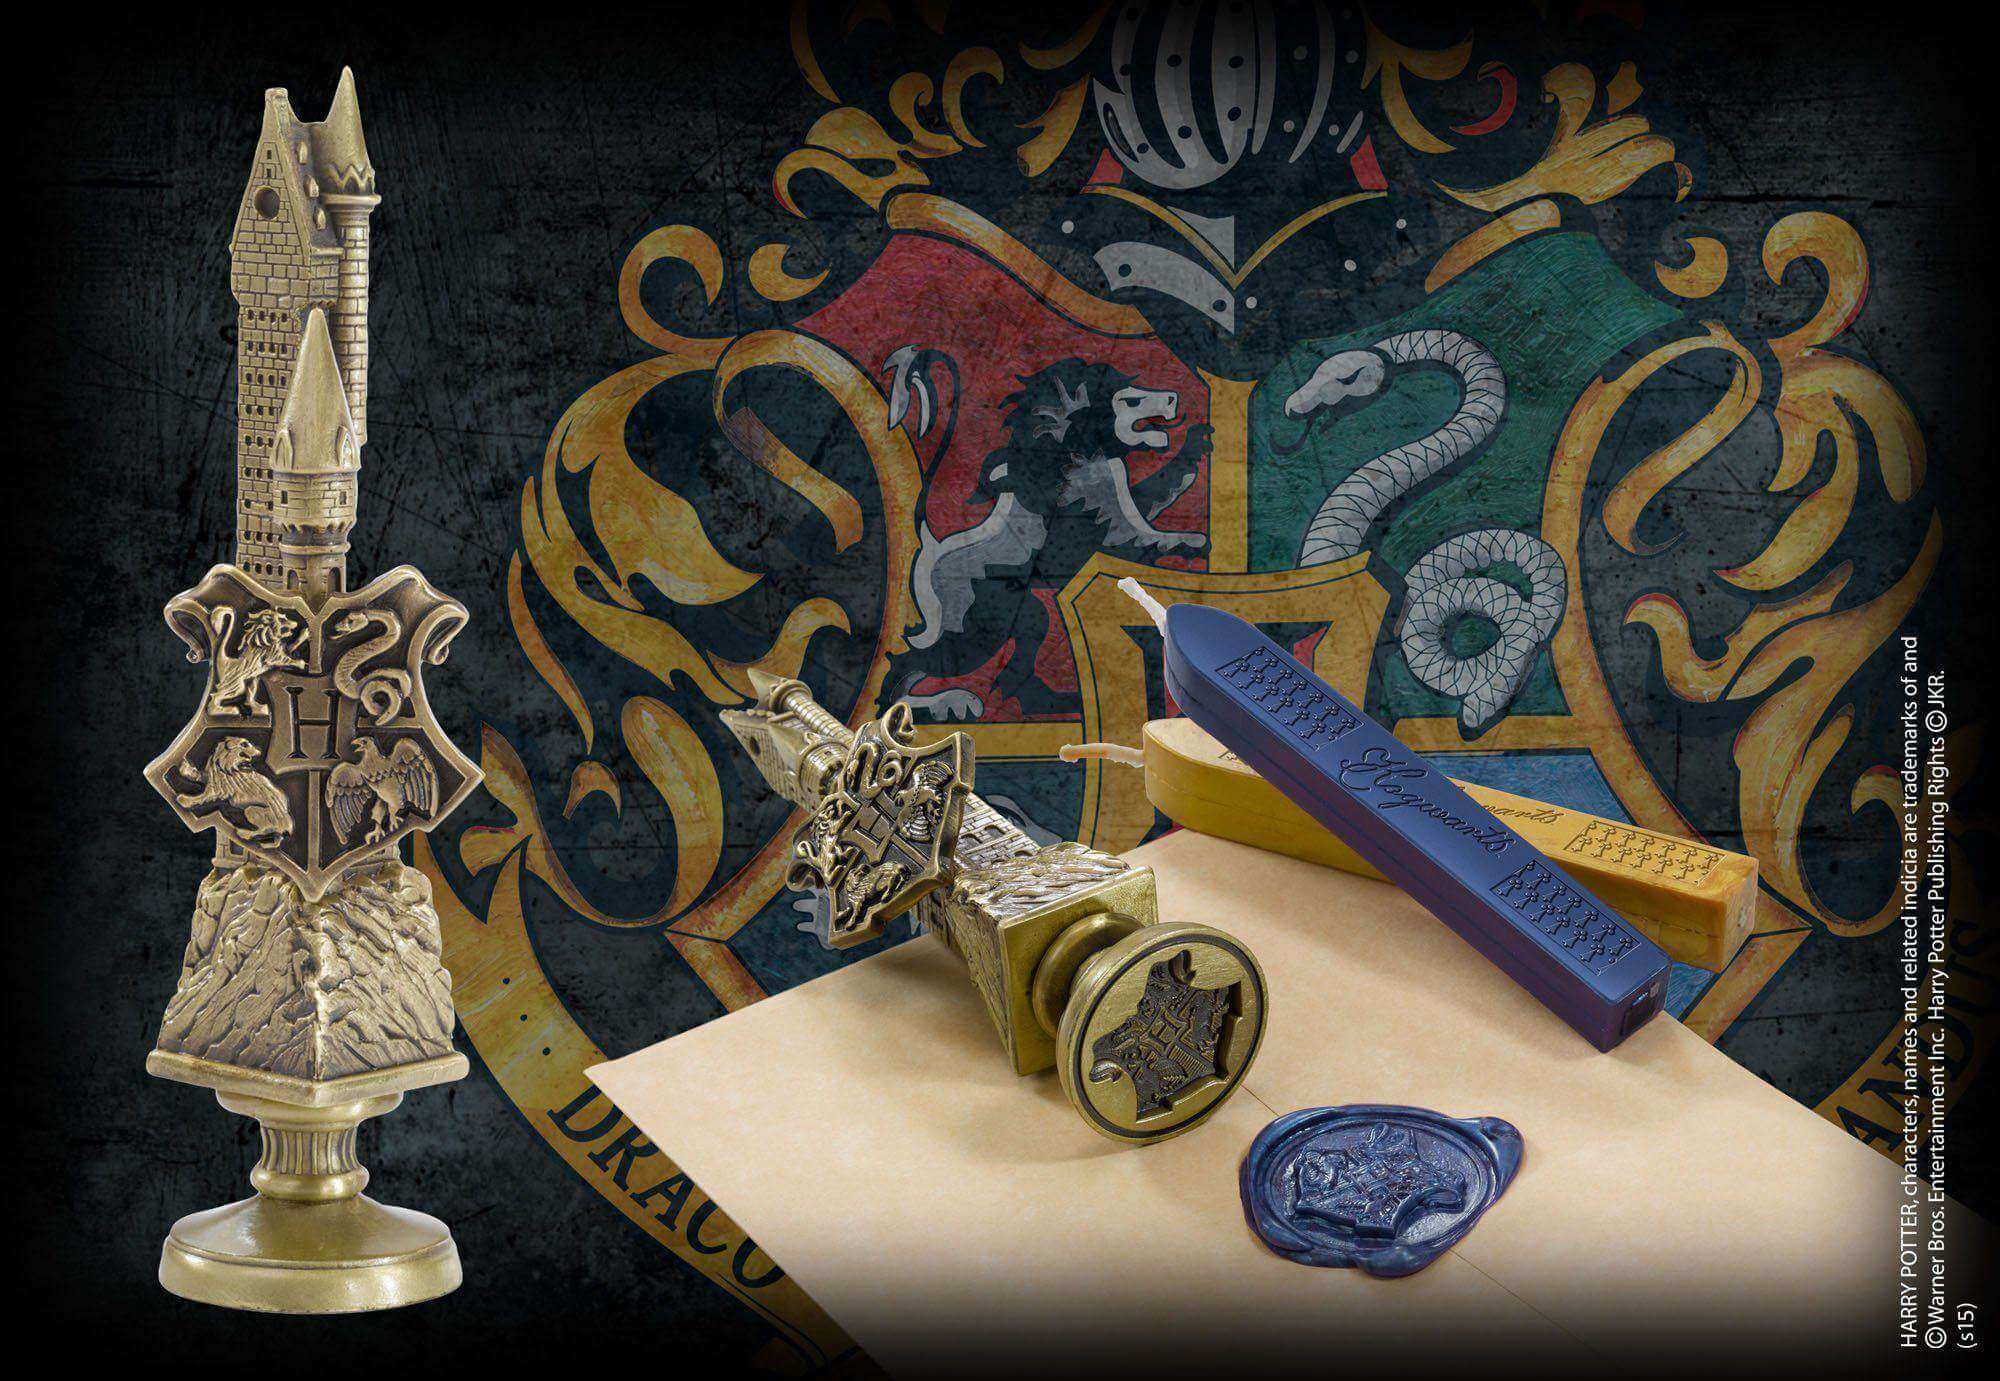 Harry Potter Slytherin Wax Seal